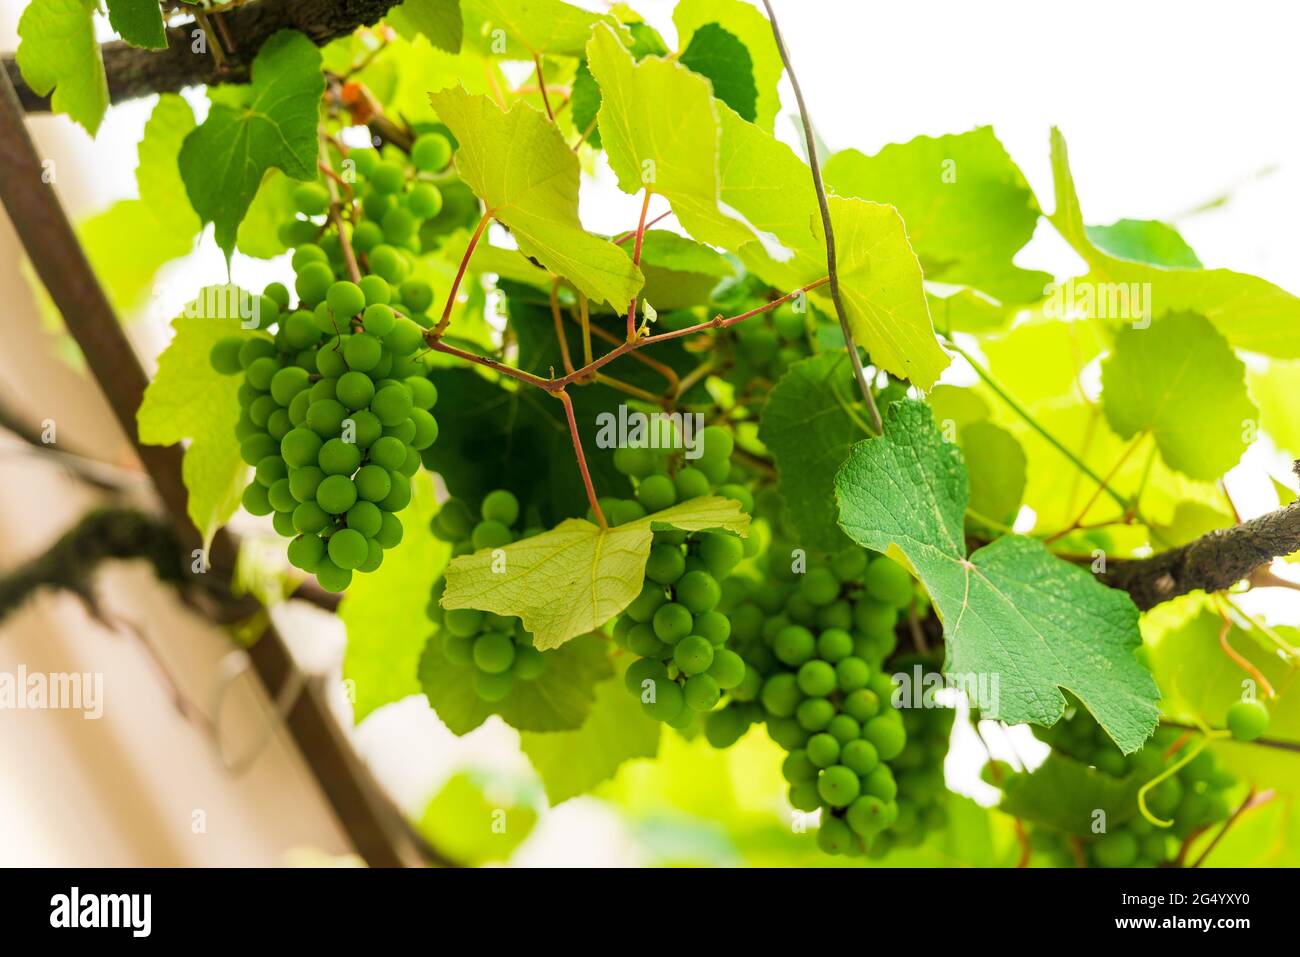 branch with small green unripe berries of the grapes Stock Photo